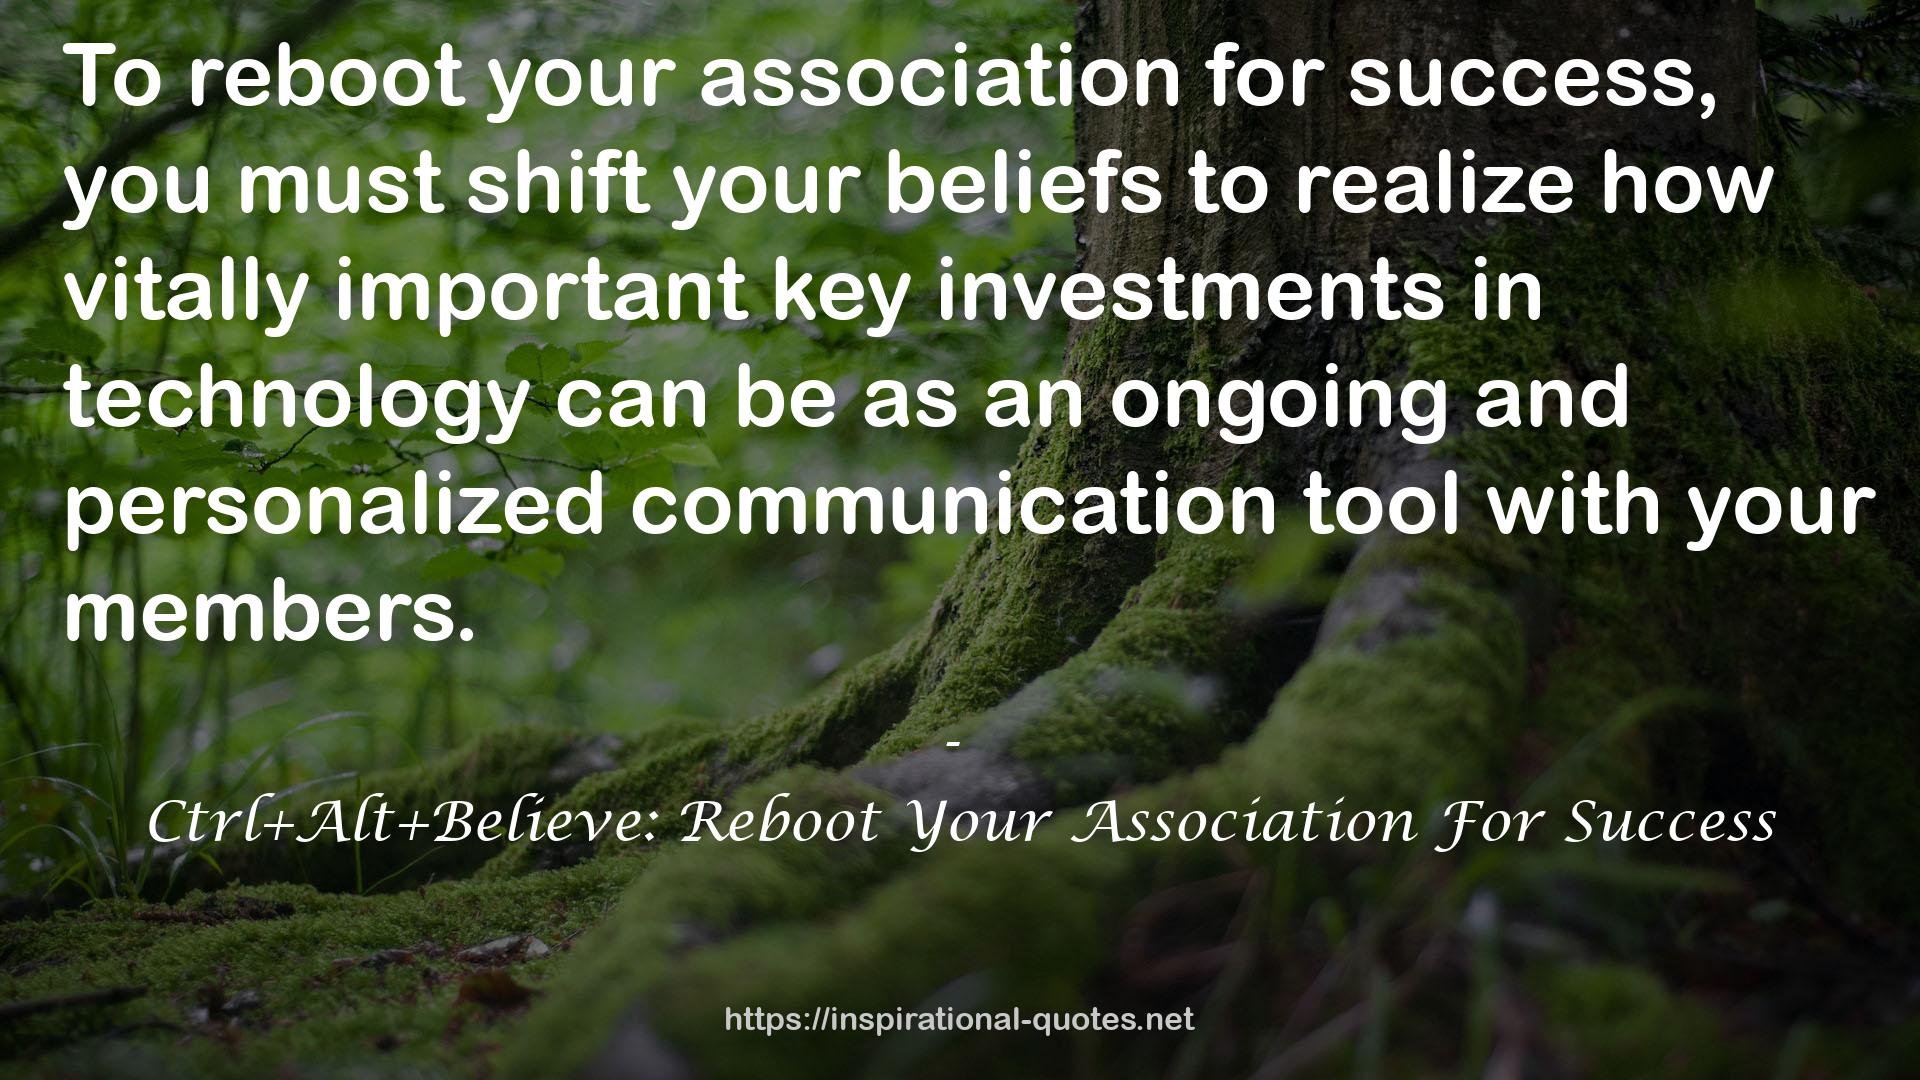 an ongoing and personalized communication tool  QUOTES